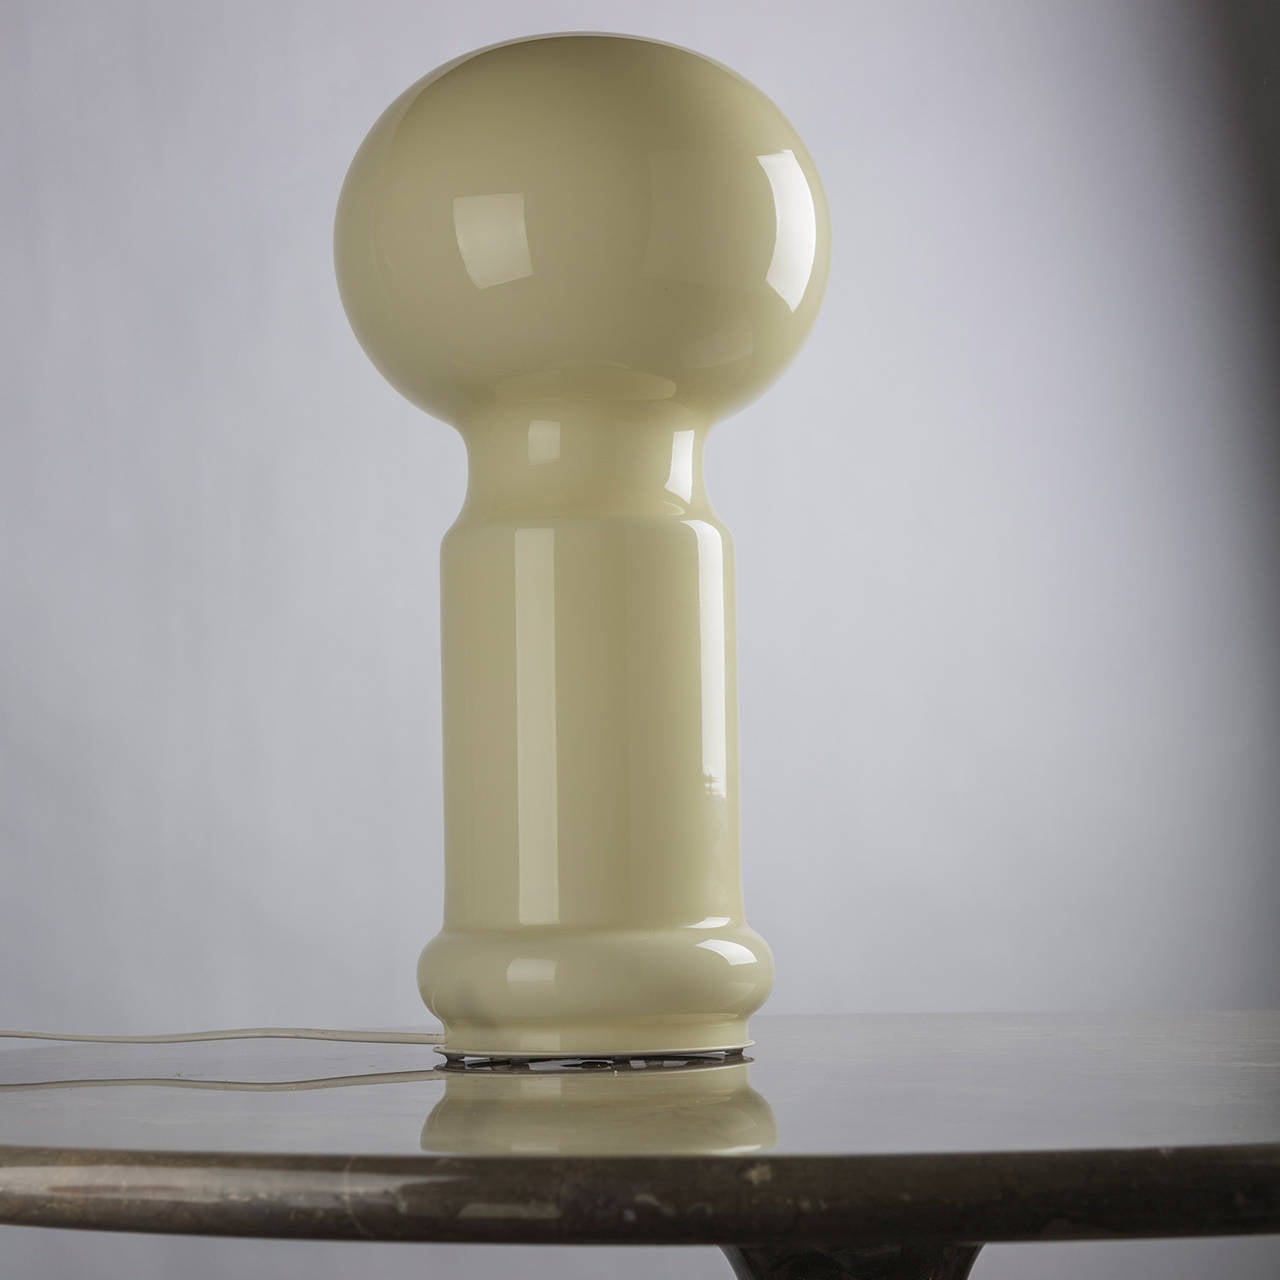 Monumental Murano glass table lamp by Vistosi.
Two pieces available, sold as single pieces.